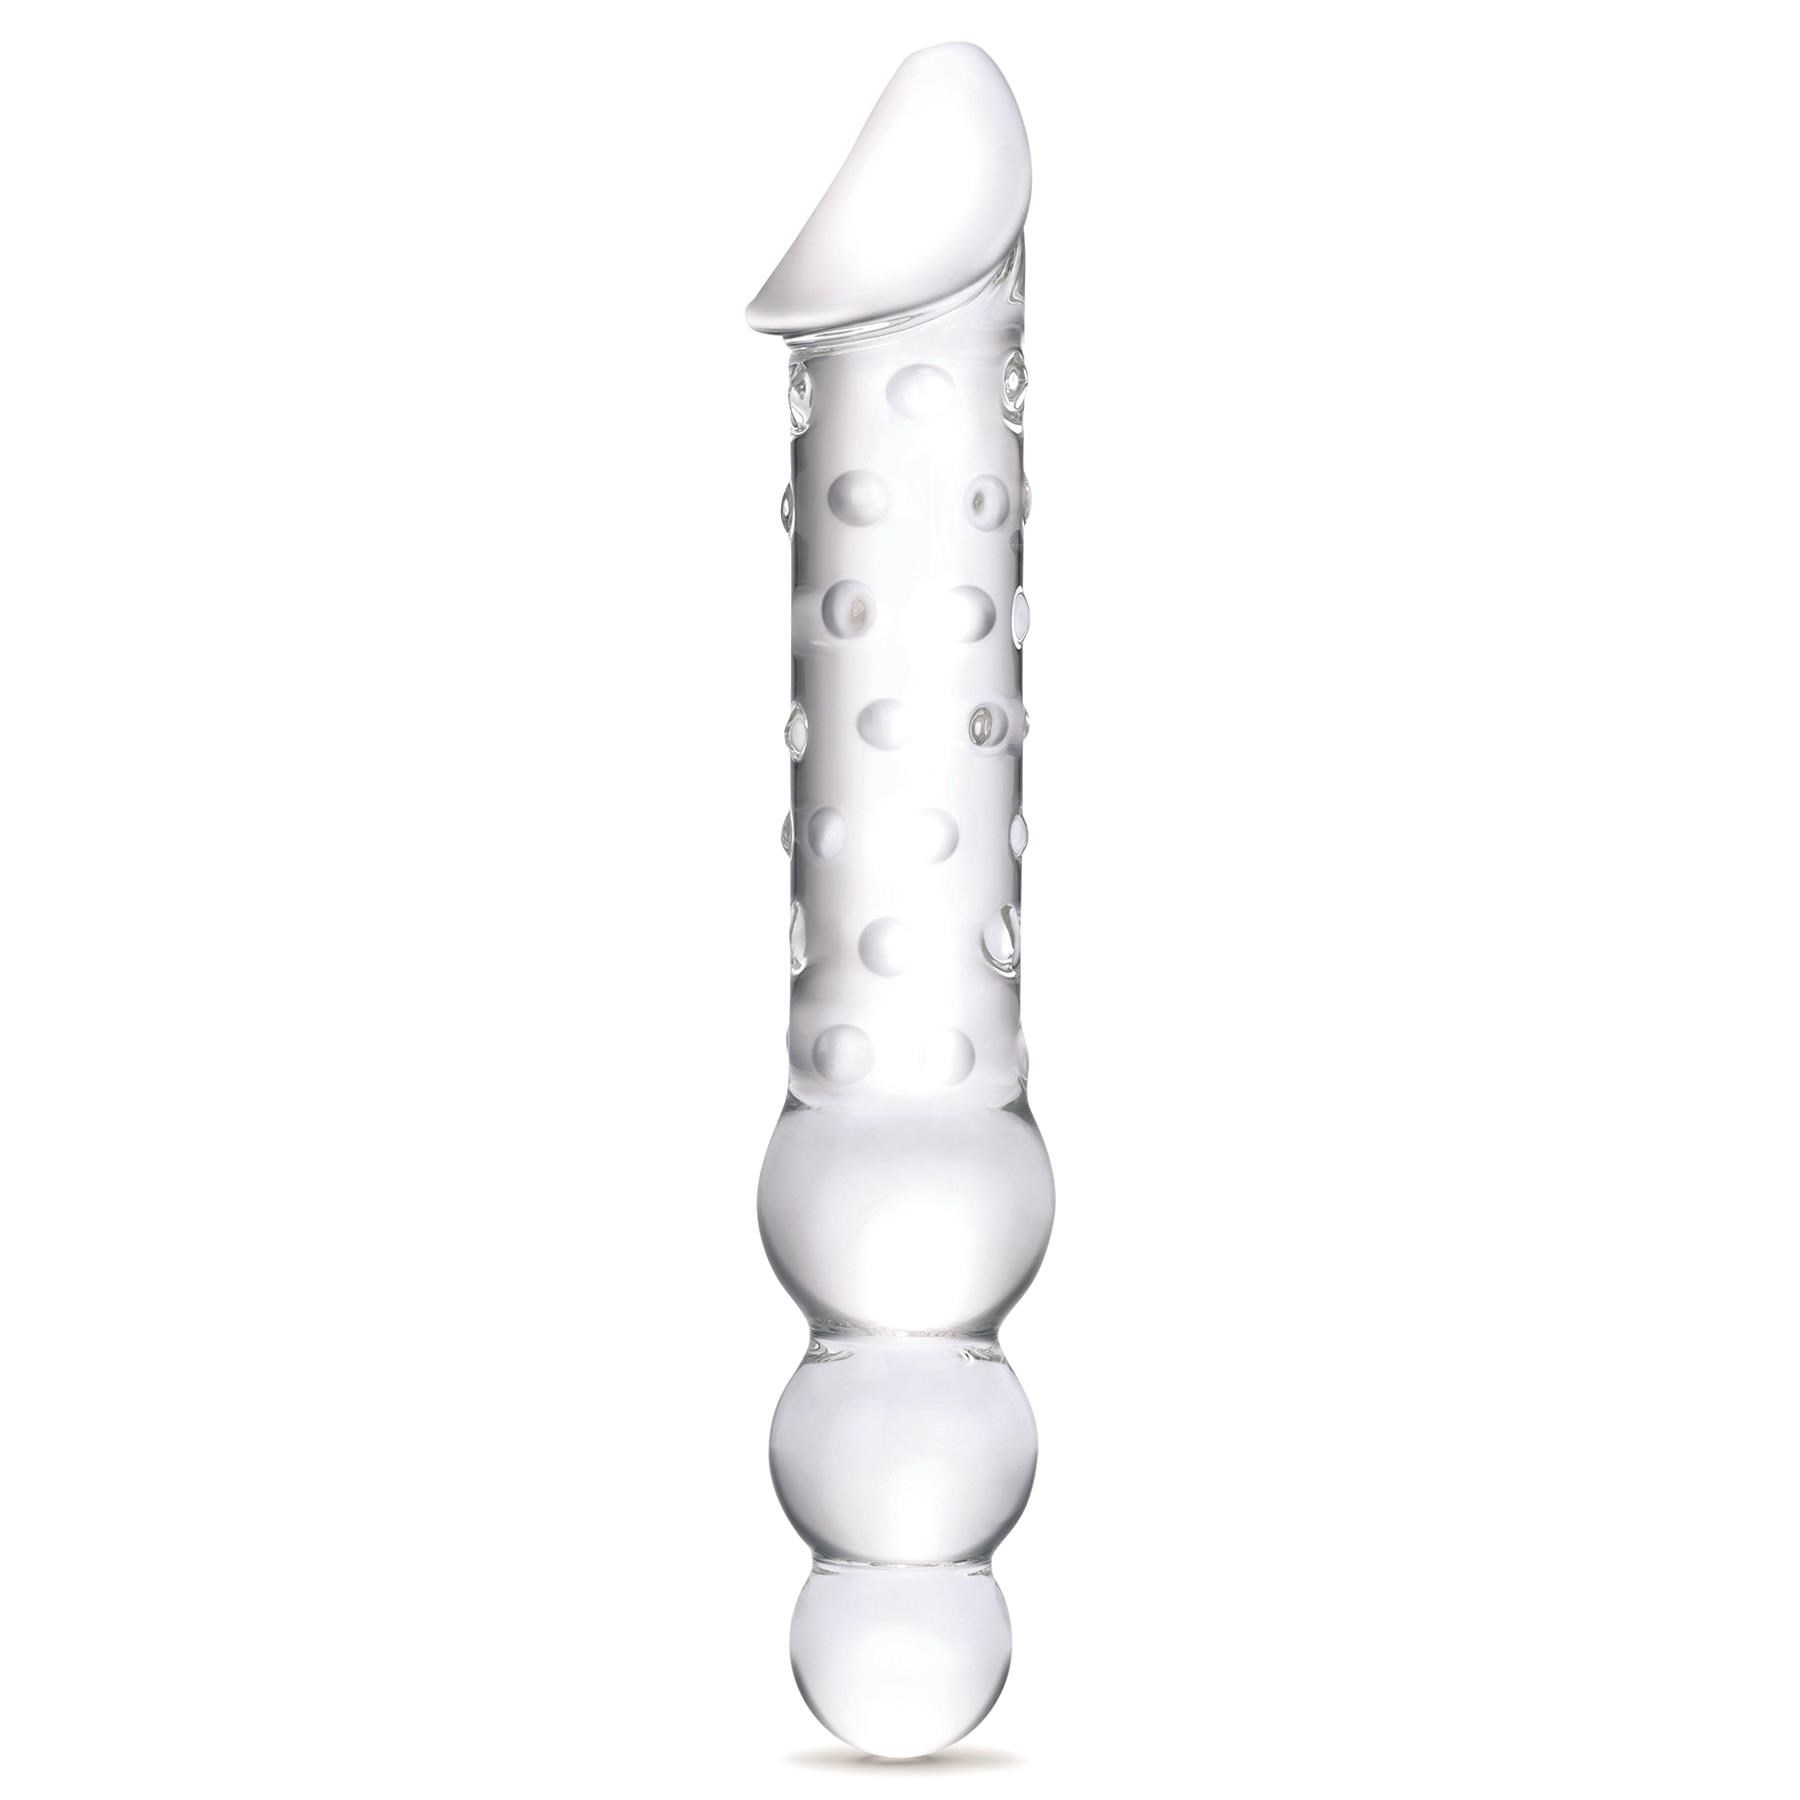 Glas 12 Inch Double Ended Glass Dildo - Product Shot #1